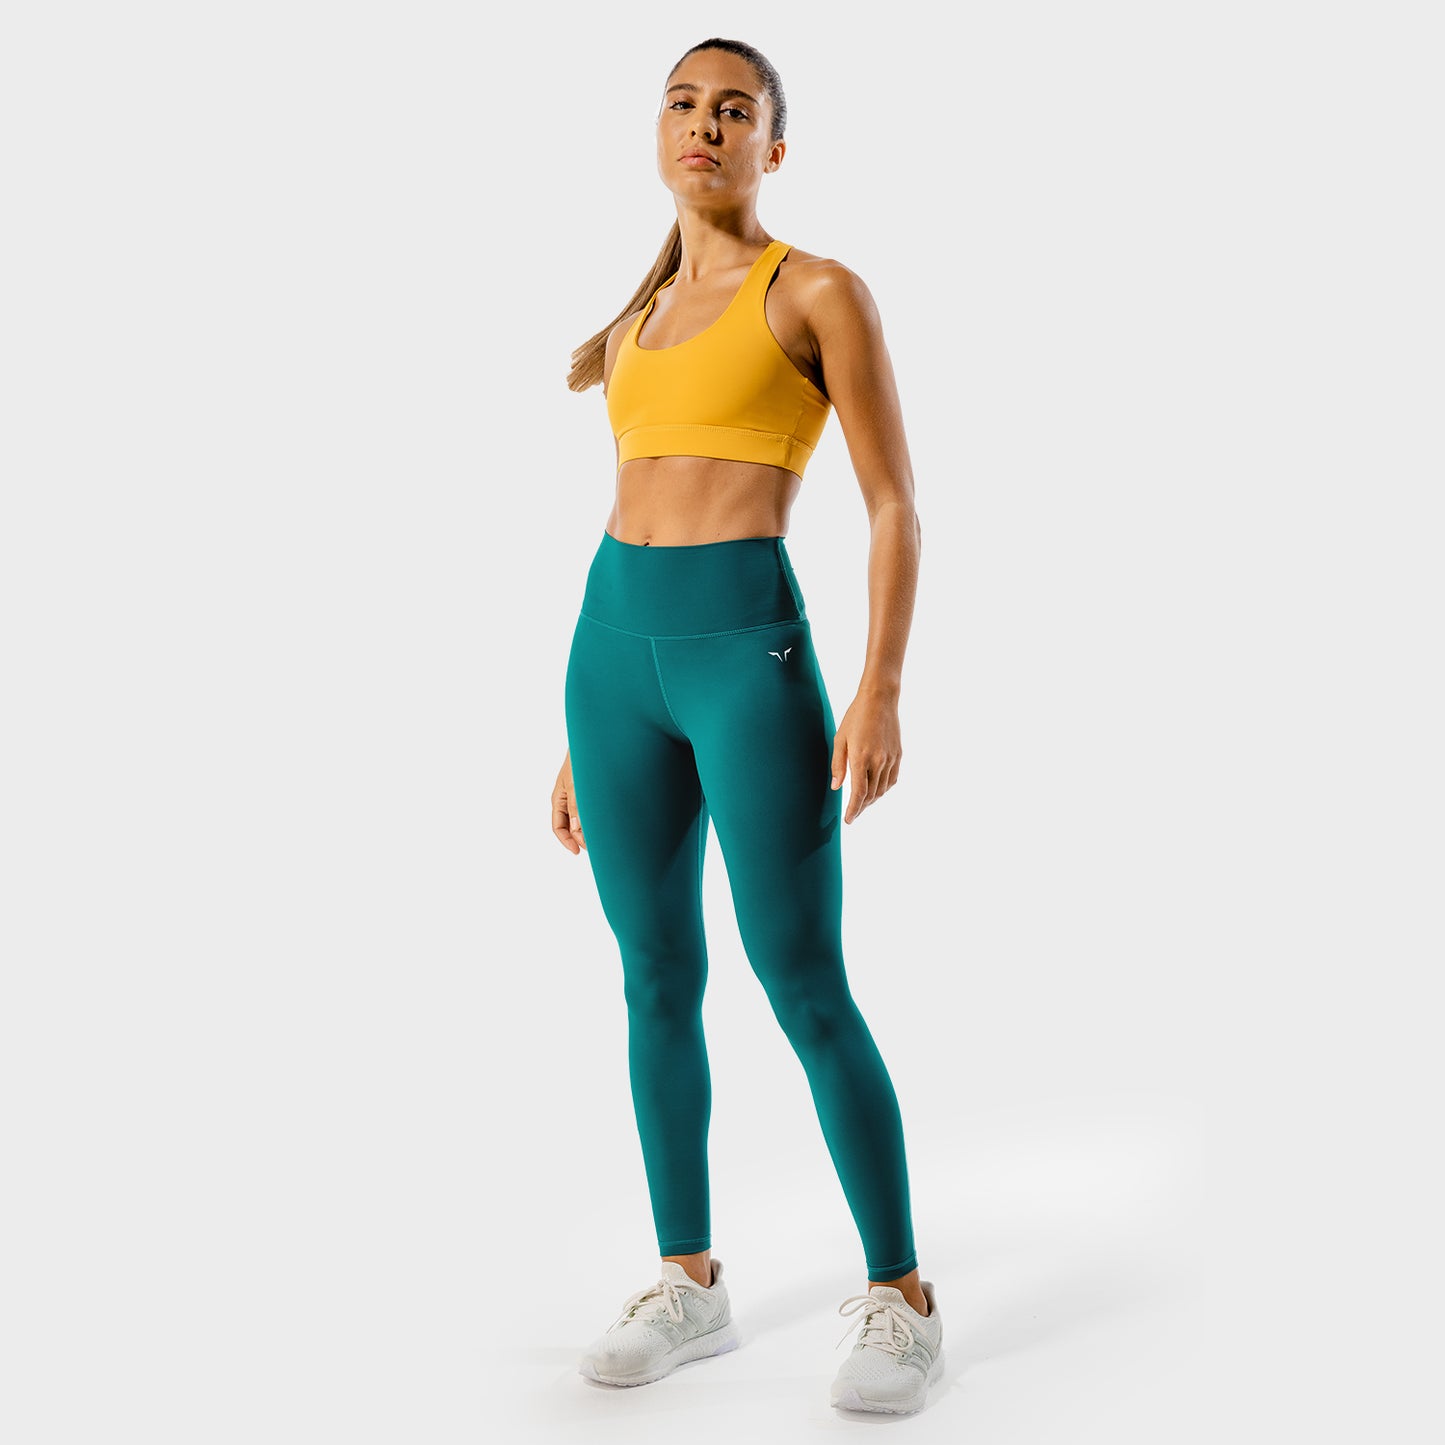 squatwolf-gym-leggings-for-women-core-agile-leggings-teal-workout-clothes